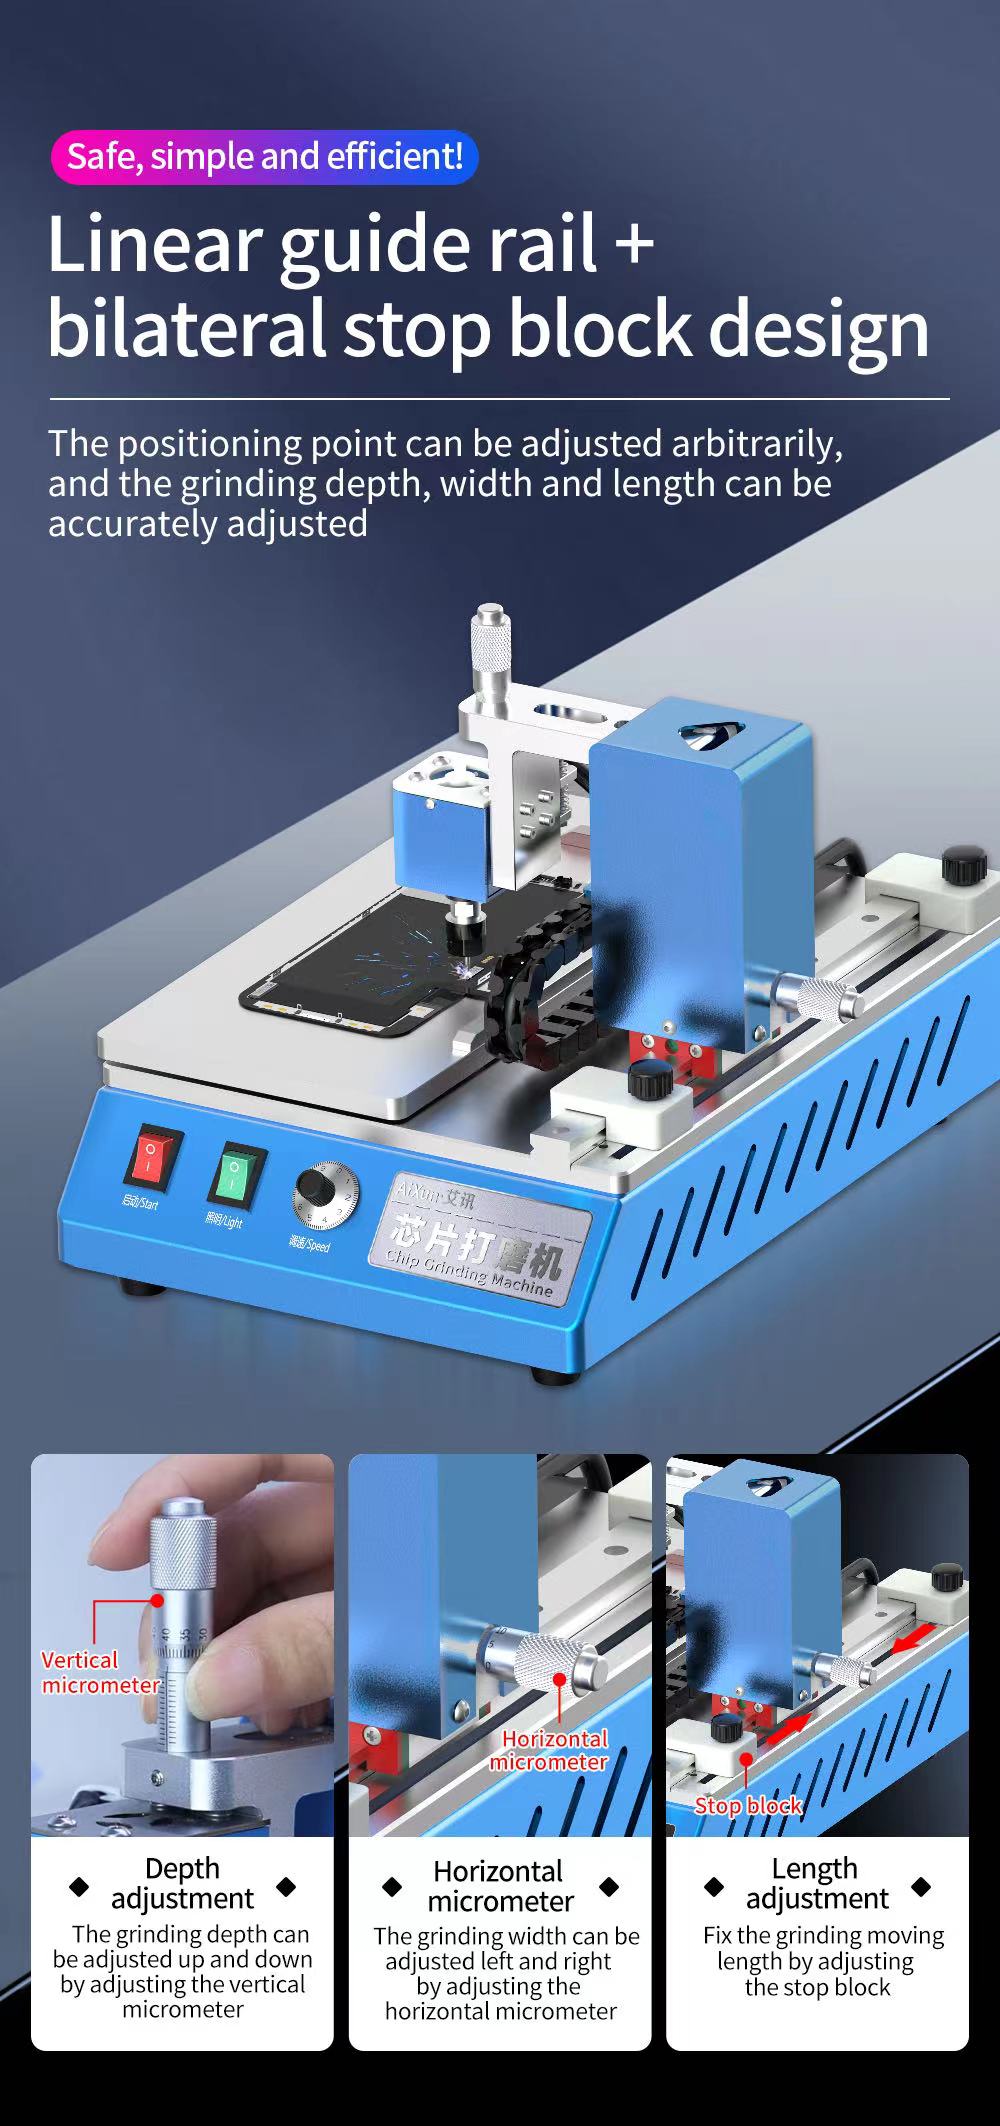 JC Aixun Screen Hard Disk CPU Touch IC Mainboard CHIP Grinder For Mobile Phone Maintenance Professional Grinding Machine Tool